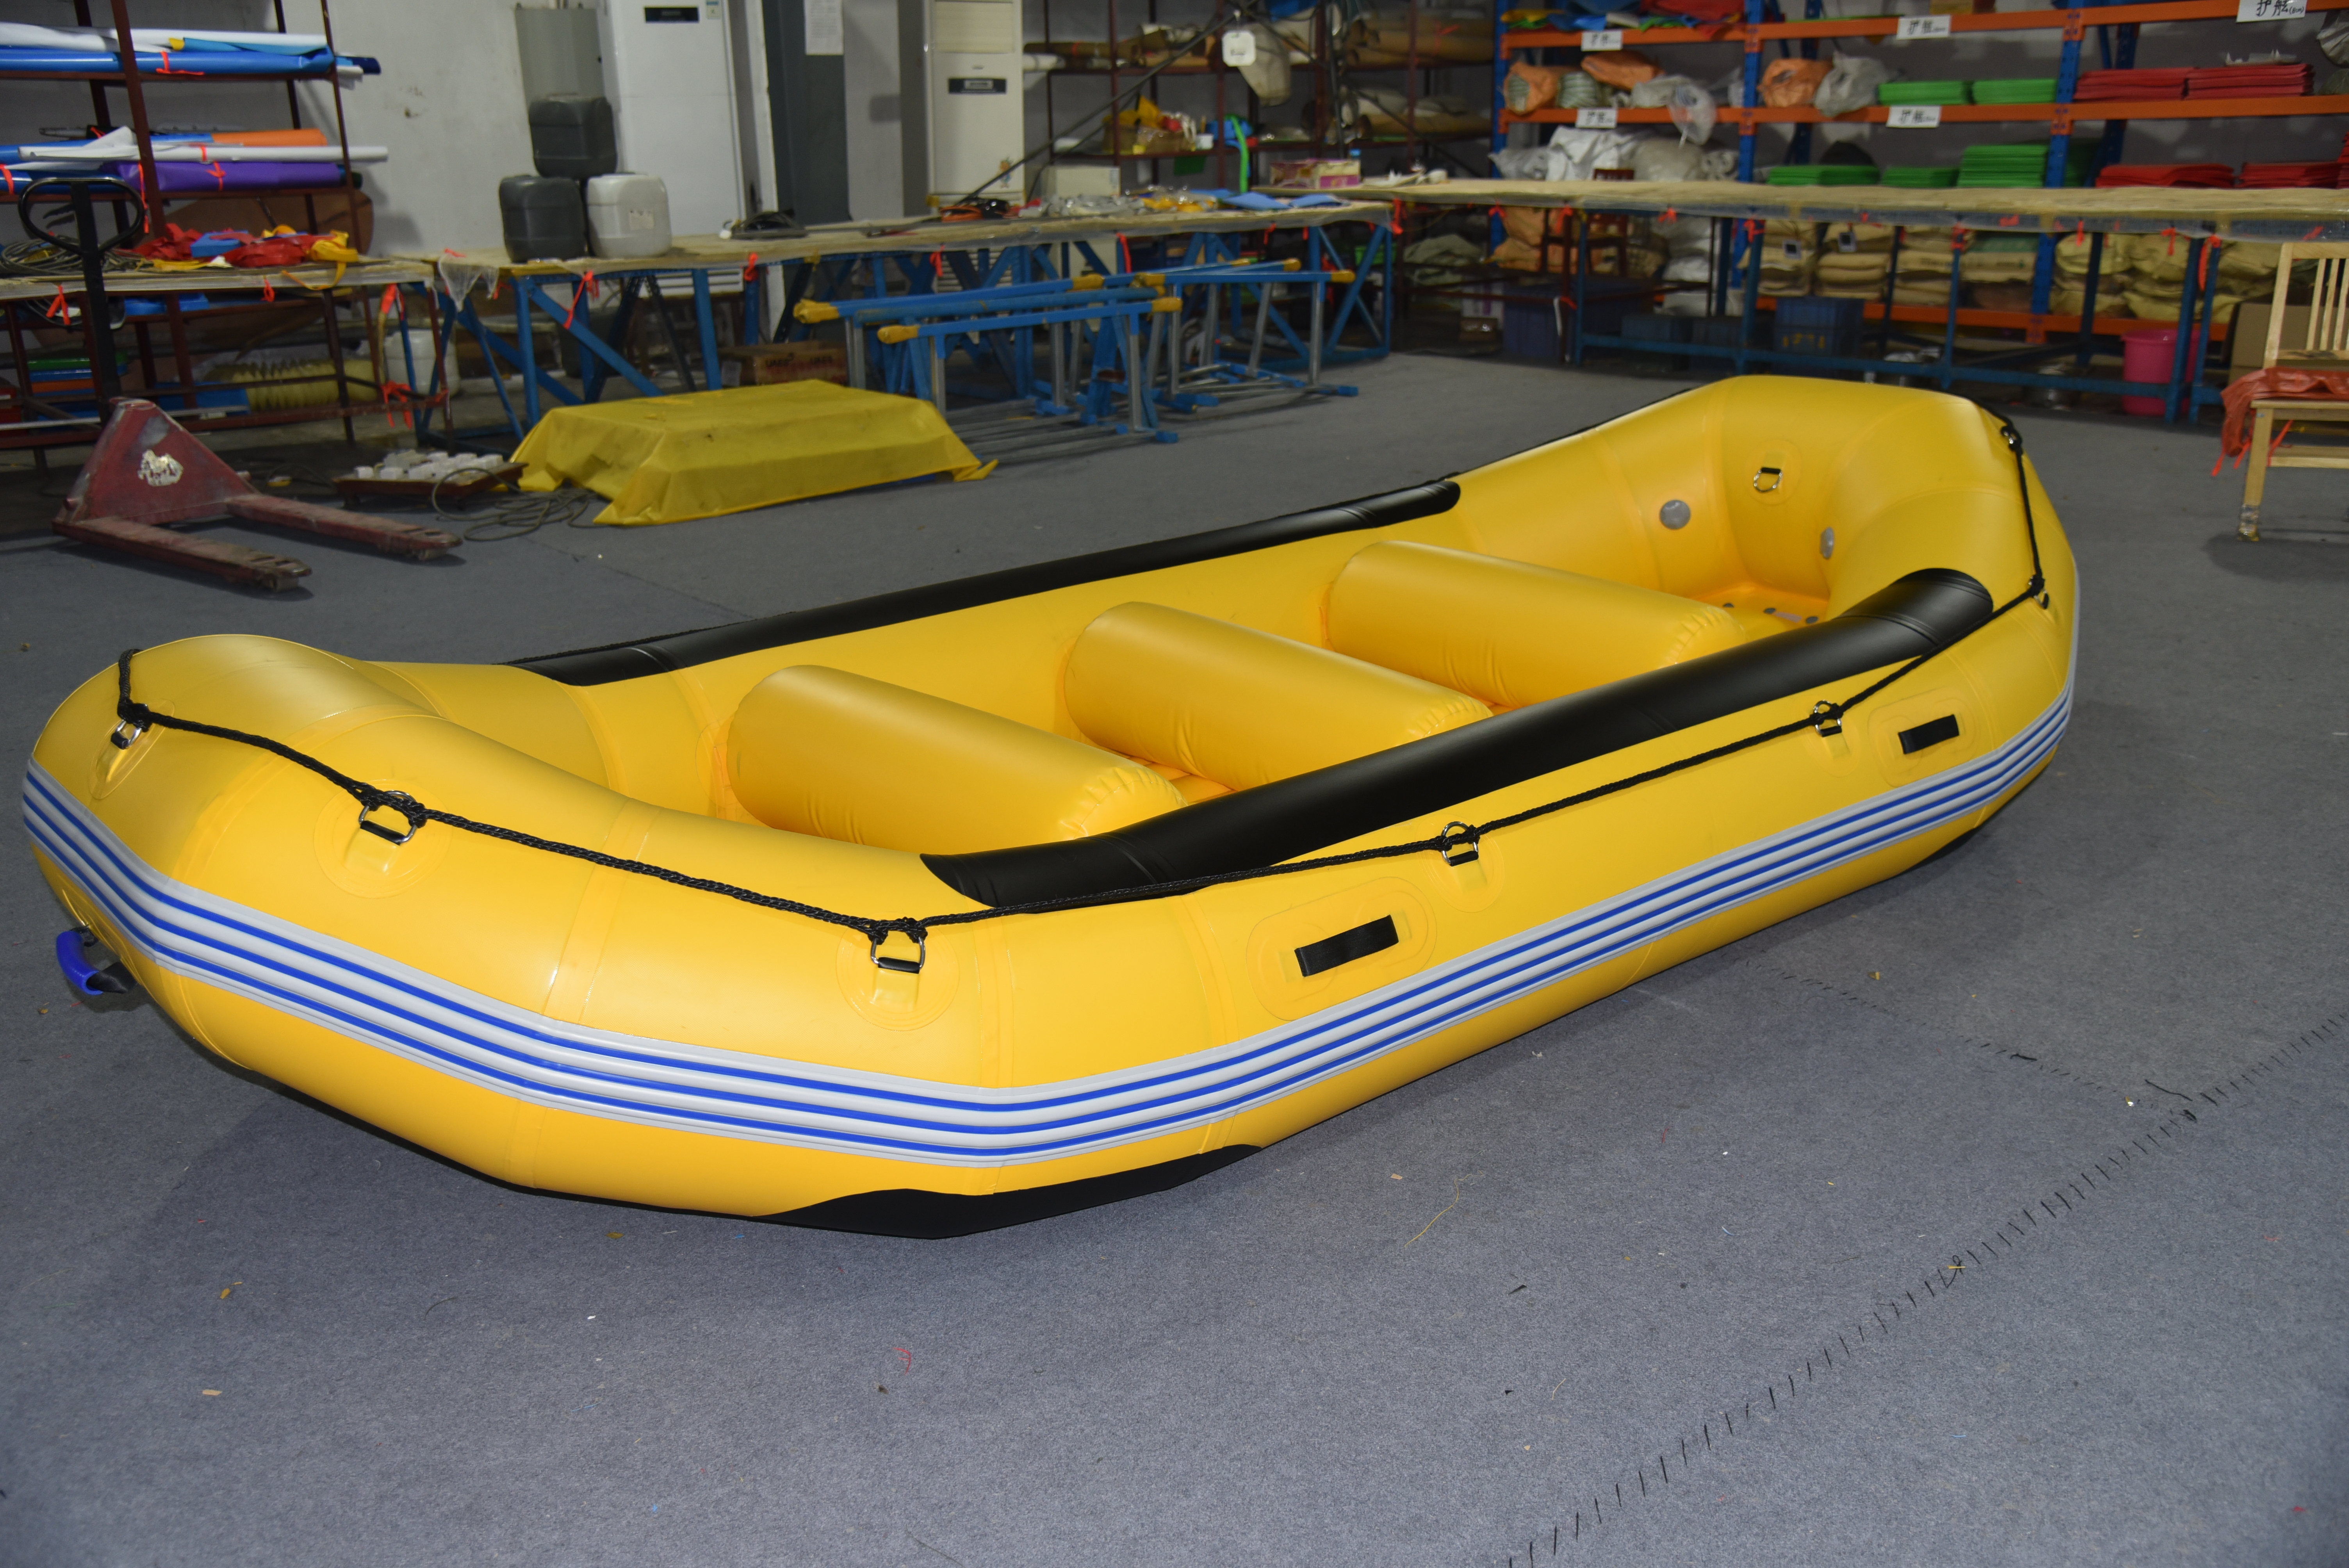 Cheap Price Of 4.25m Self Bailing Inflatable Boat 14 Foot Rafting Boat